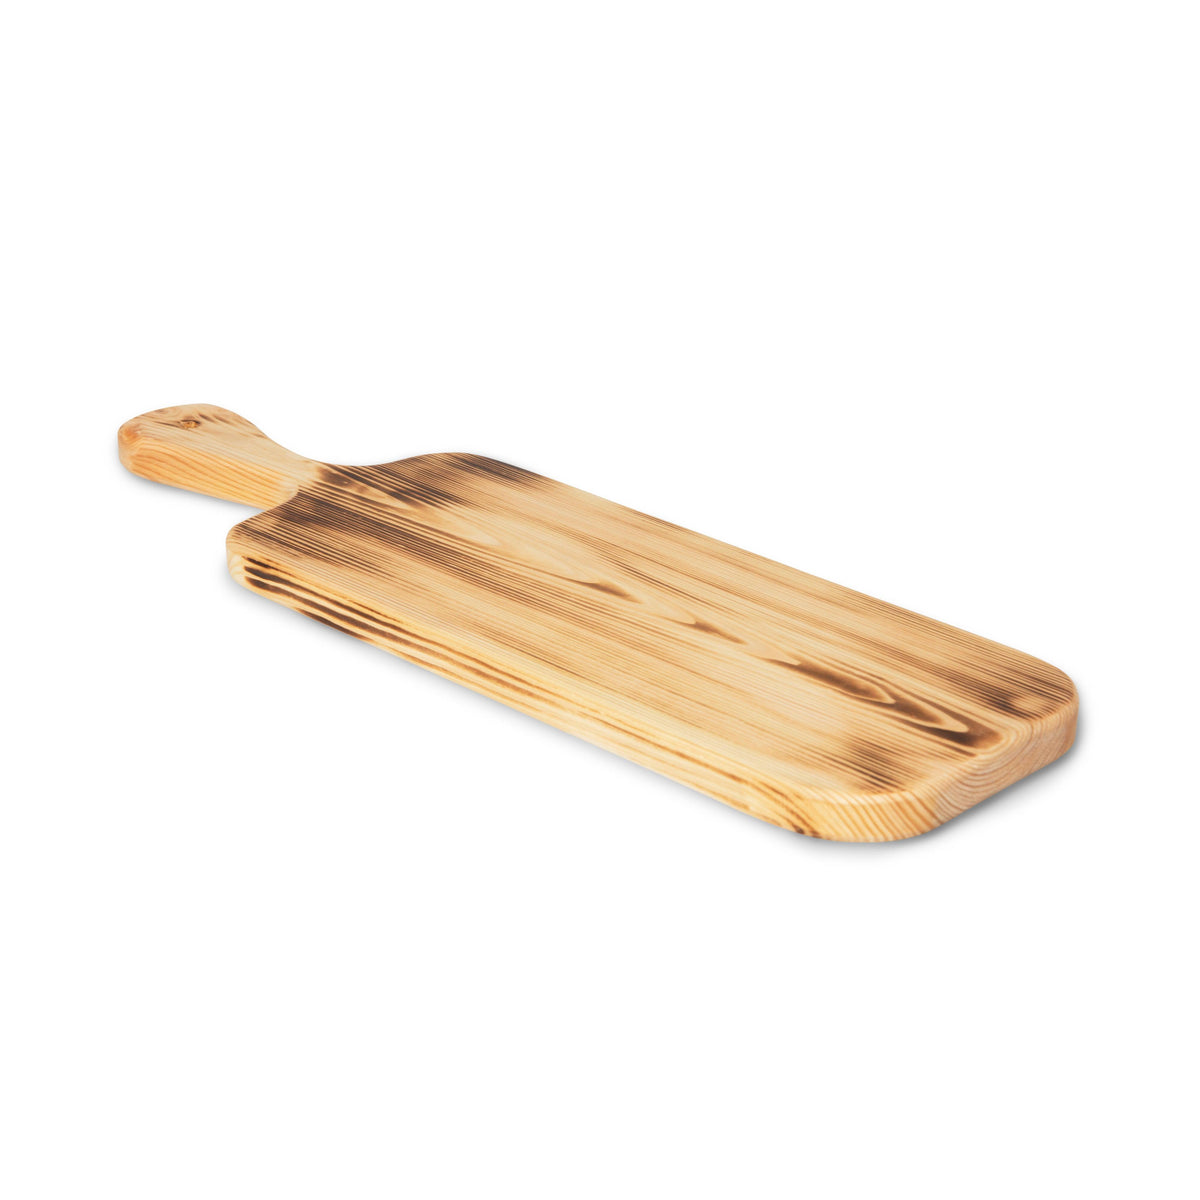 A Bespoke 77 Small Pine Serving Board/Paddle on a white background.